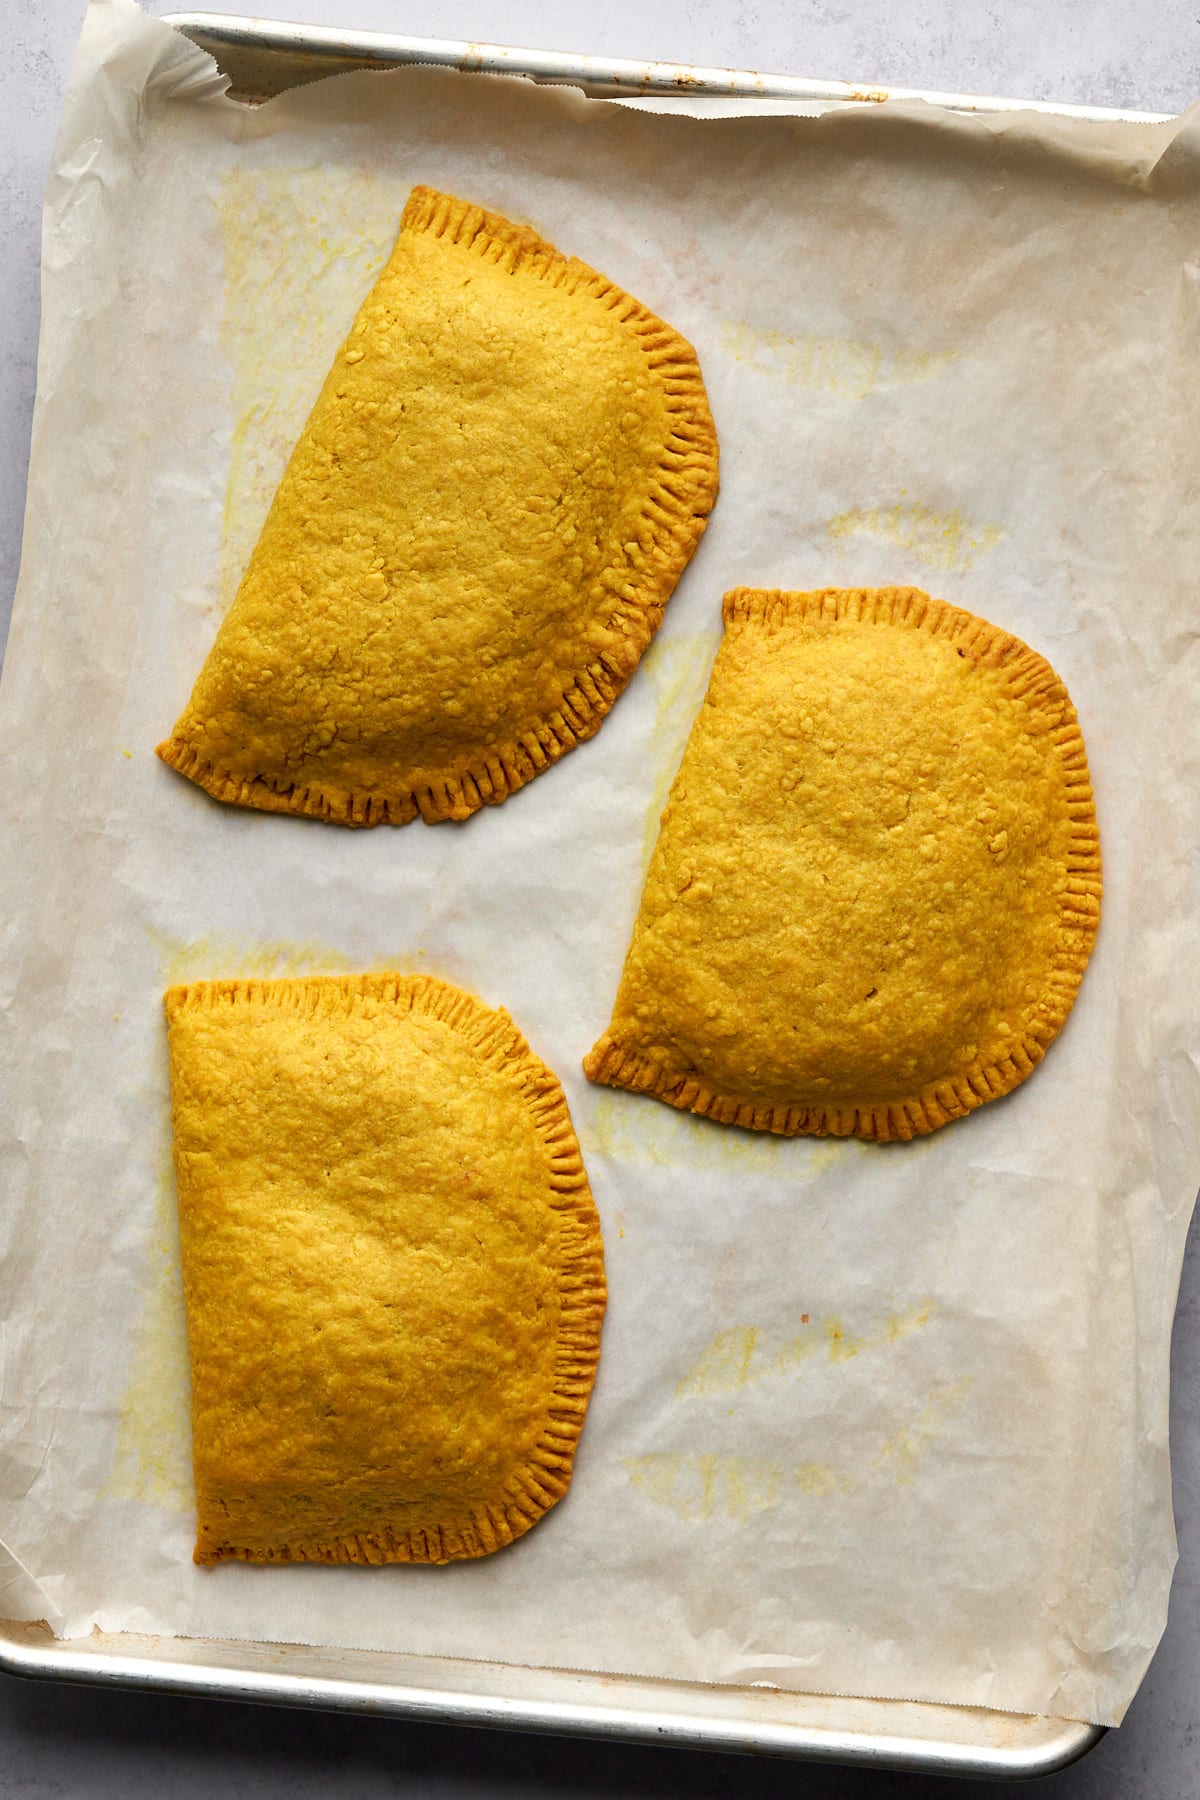 Three baked jamaican patties on baking tray liked with parchment paper.